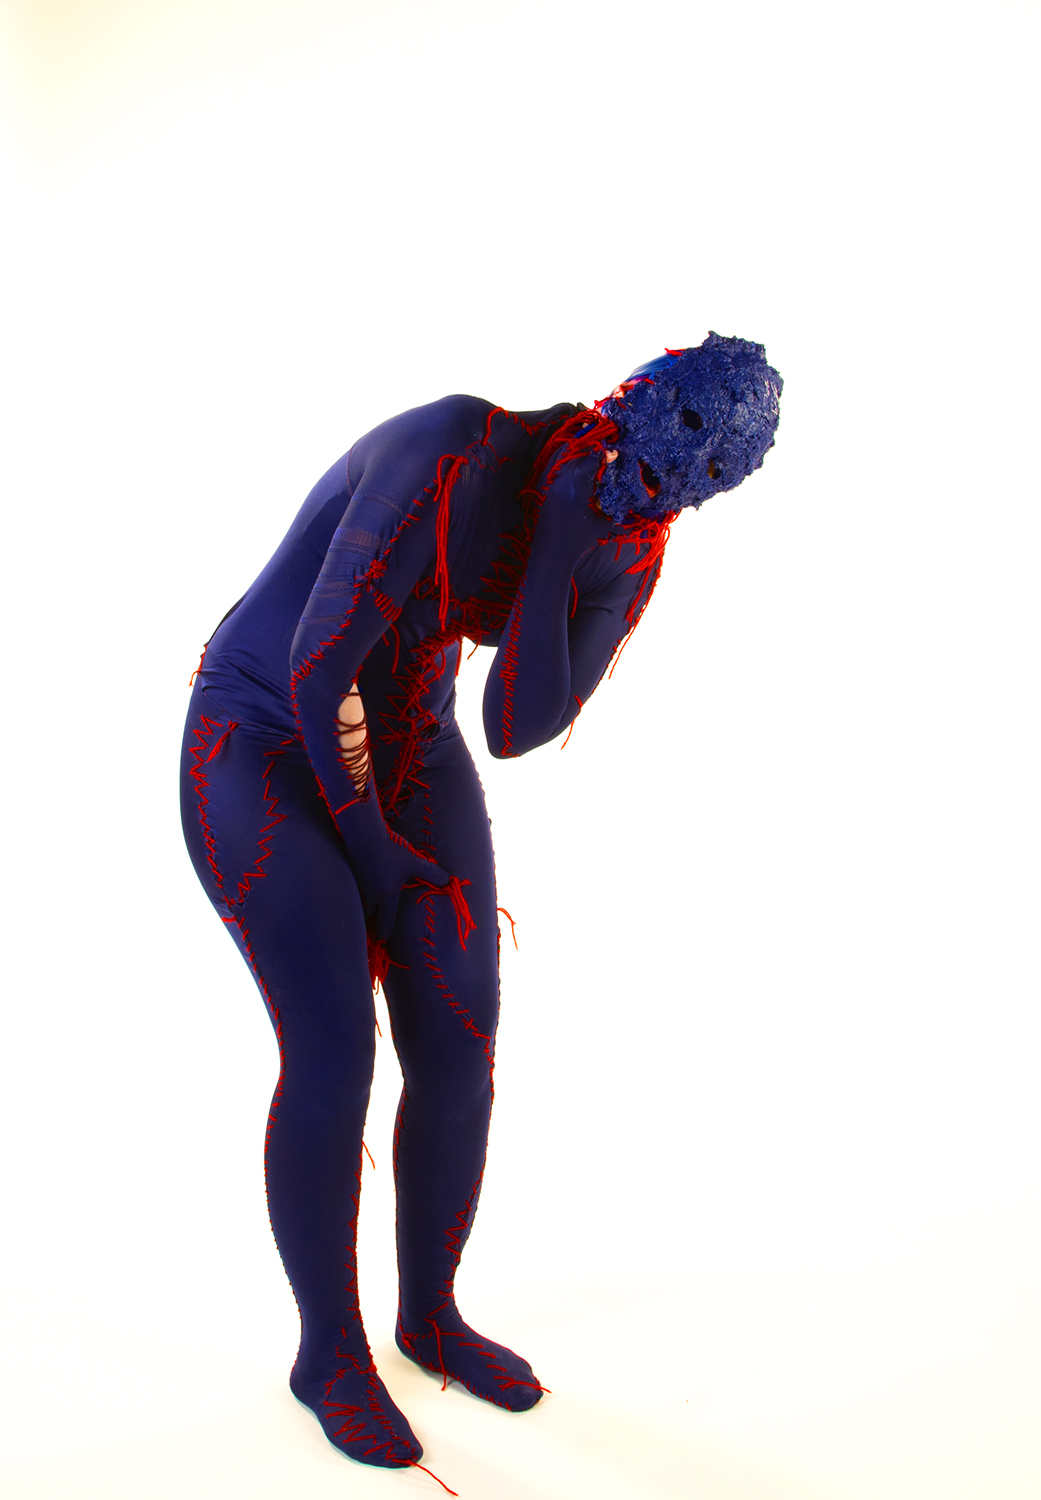 Human figure bent over covered in purple with a textured purple face with blood red fibres coming from the neck and parts of the body